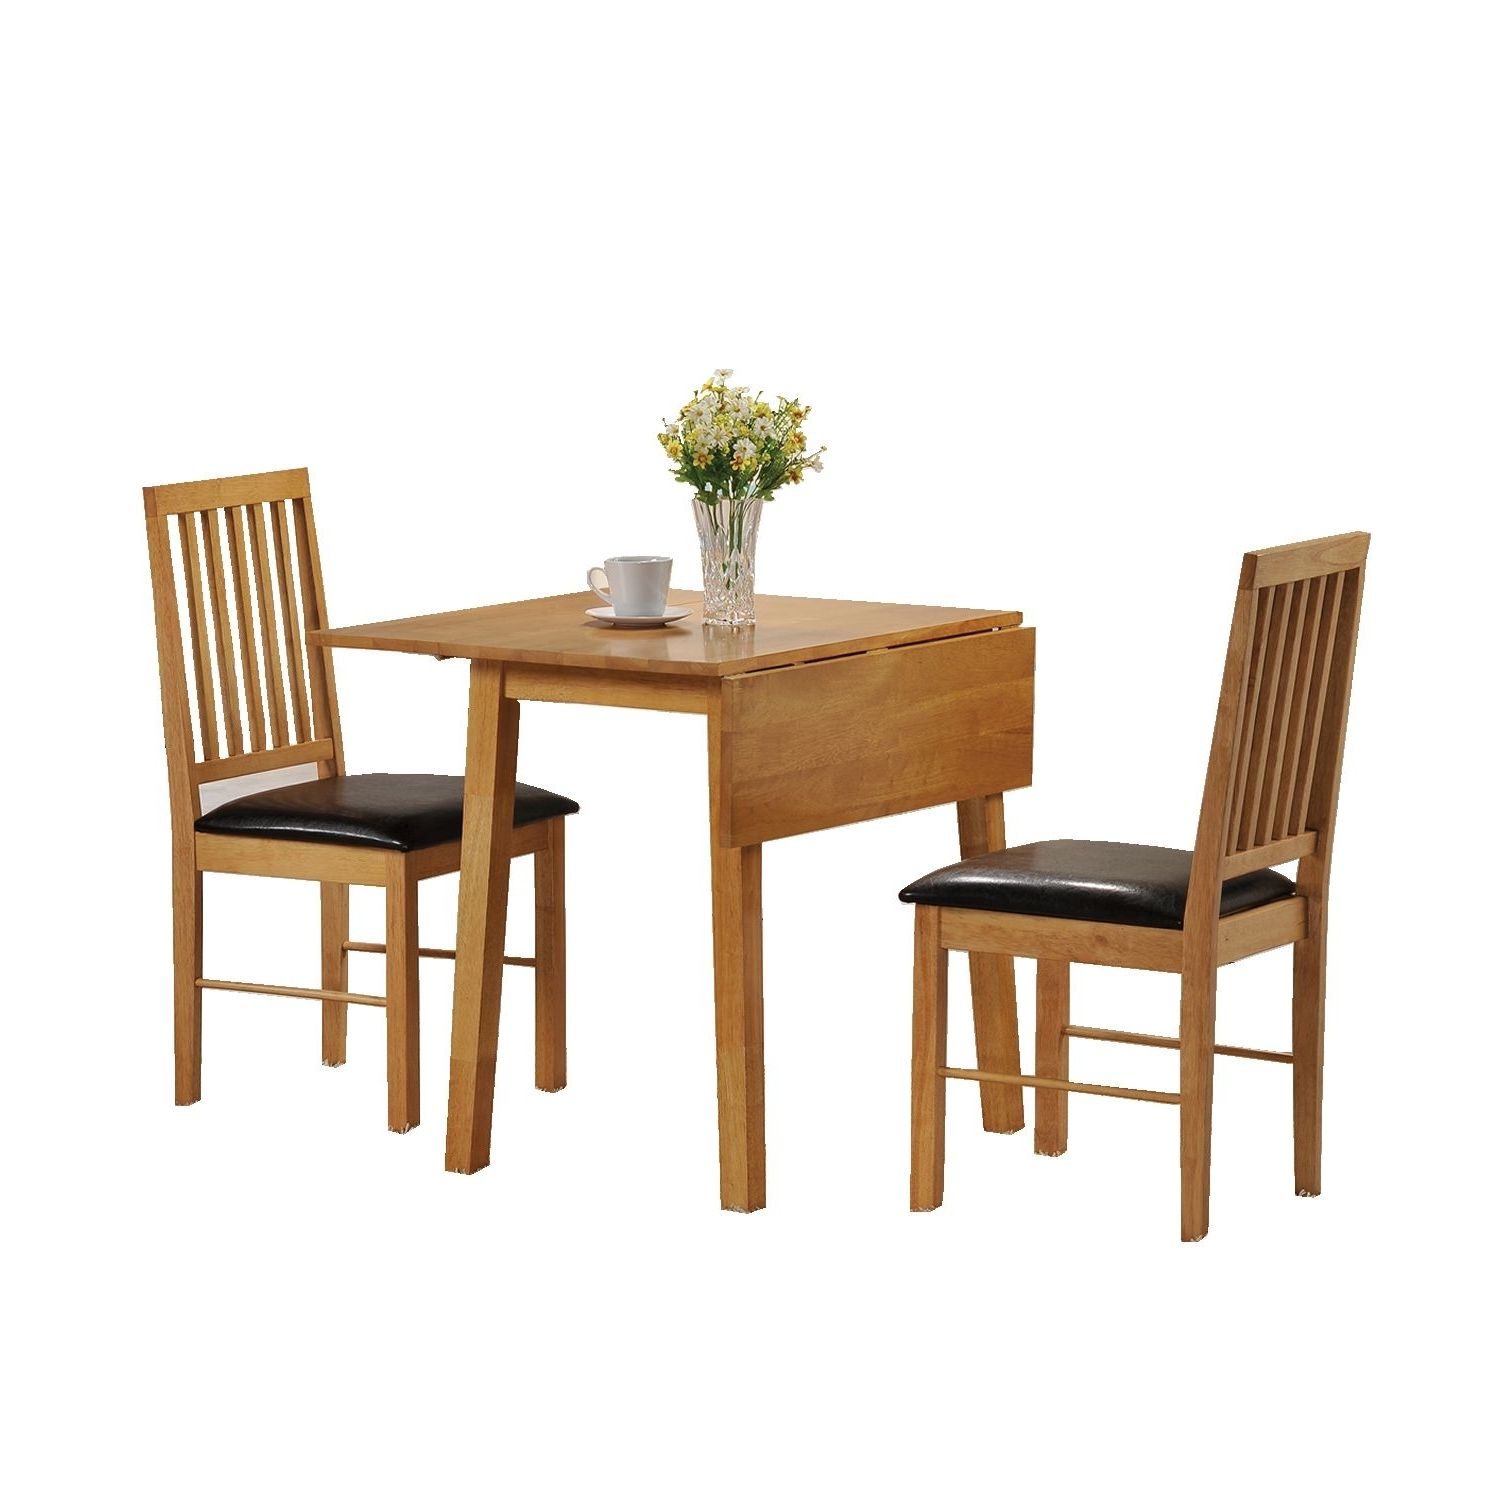 Two Seater Dining Tables Within Fashionable 2 Seater Dining Room Set (View 19 of 25)